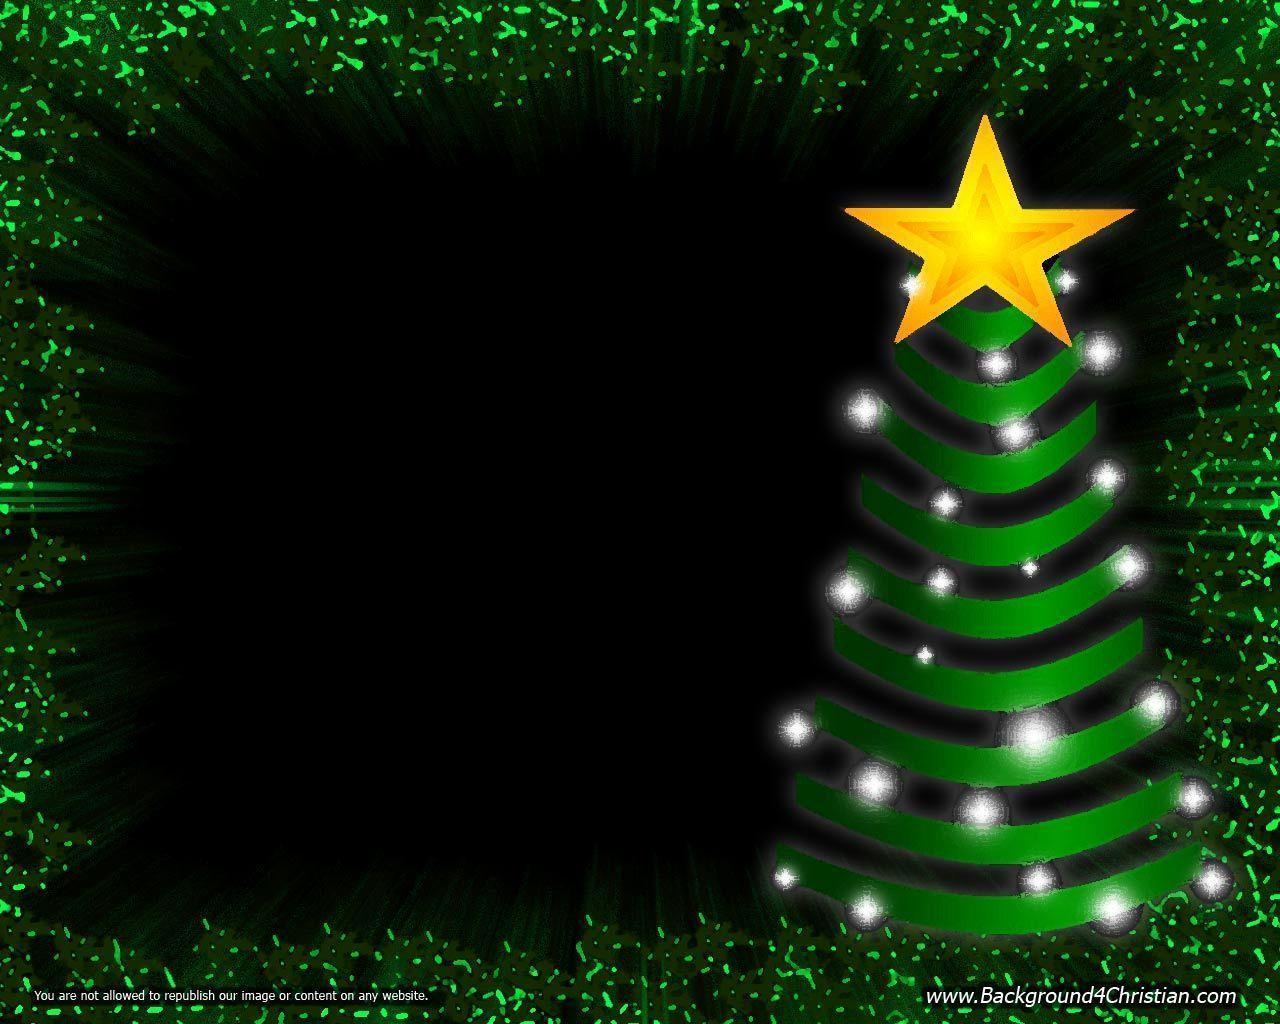 Background 4 Christian Download Christian Clipart